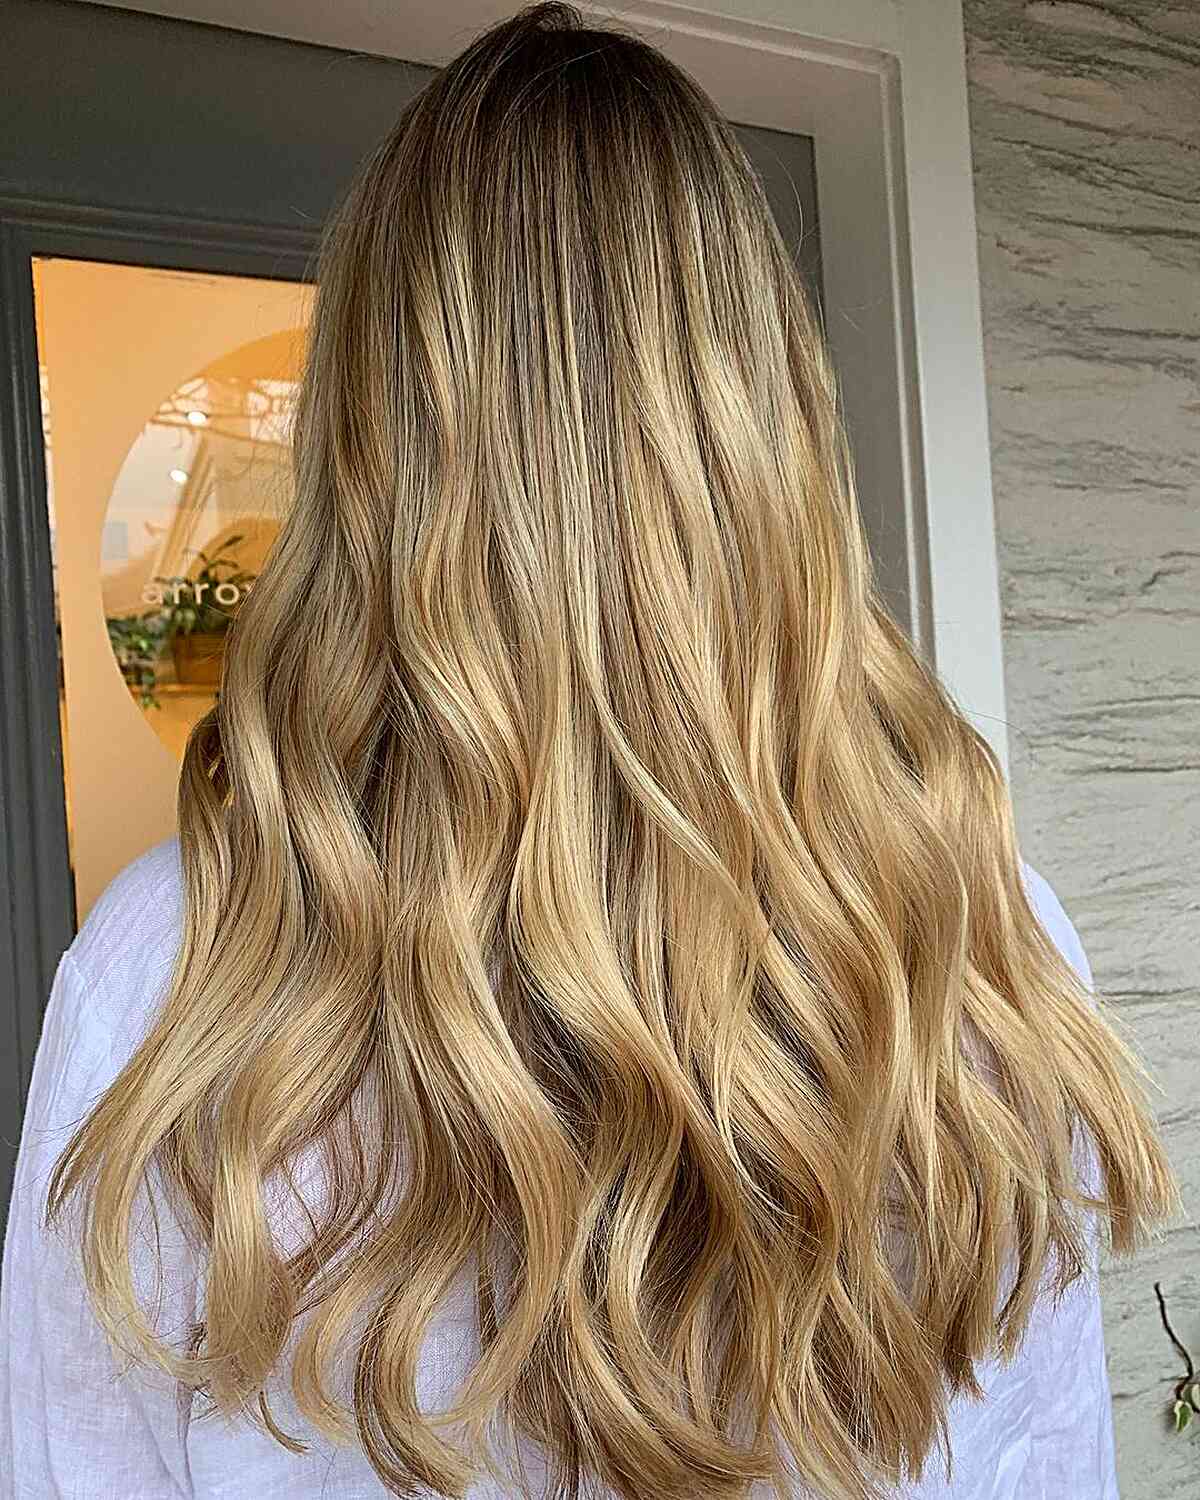 What Hair Colors Do Girls Find Most Attractive - Handsome Hair Pro